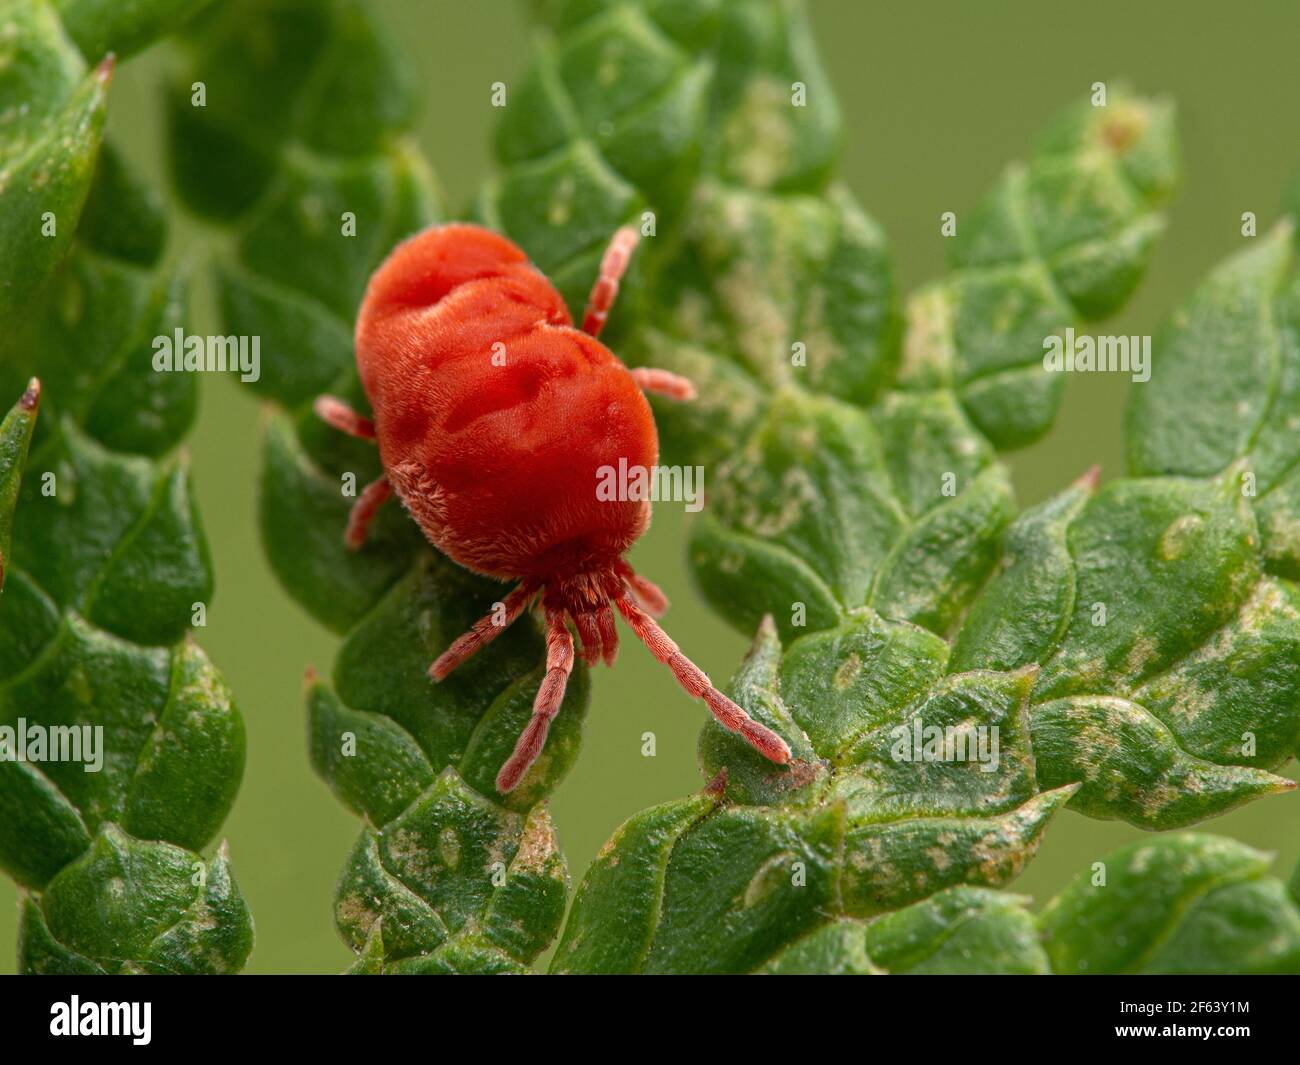 Brightly colored red velvet mite, Trombidiidae species, crawling on the green scale-like leaves of a red cedar tree Stock Photo